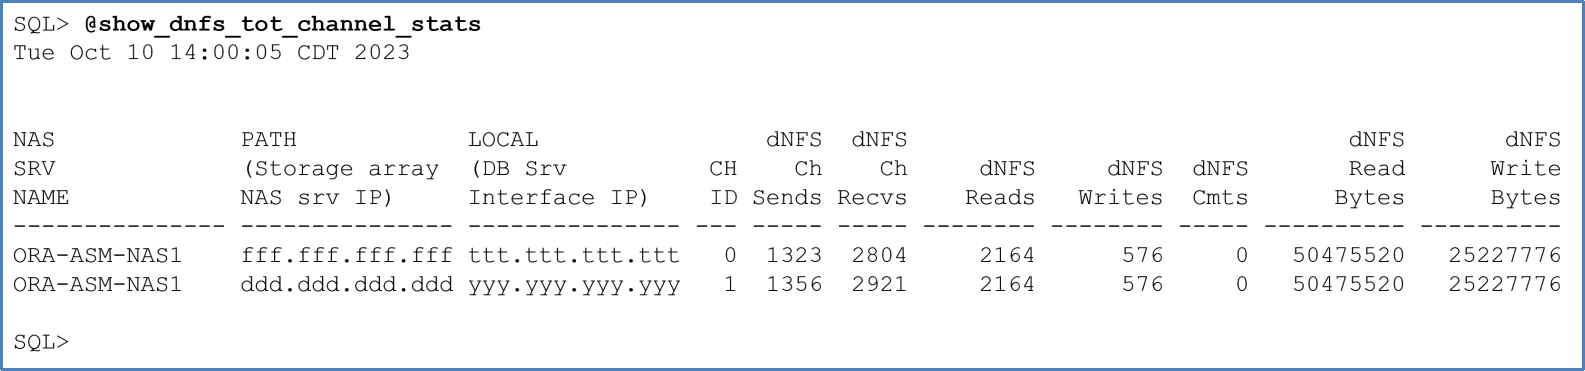 This diagram shows the Oracle dNFS network statistics for all Oracle dNFS channels in use.